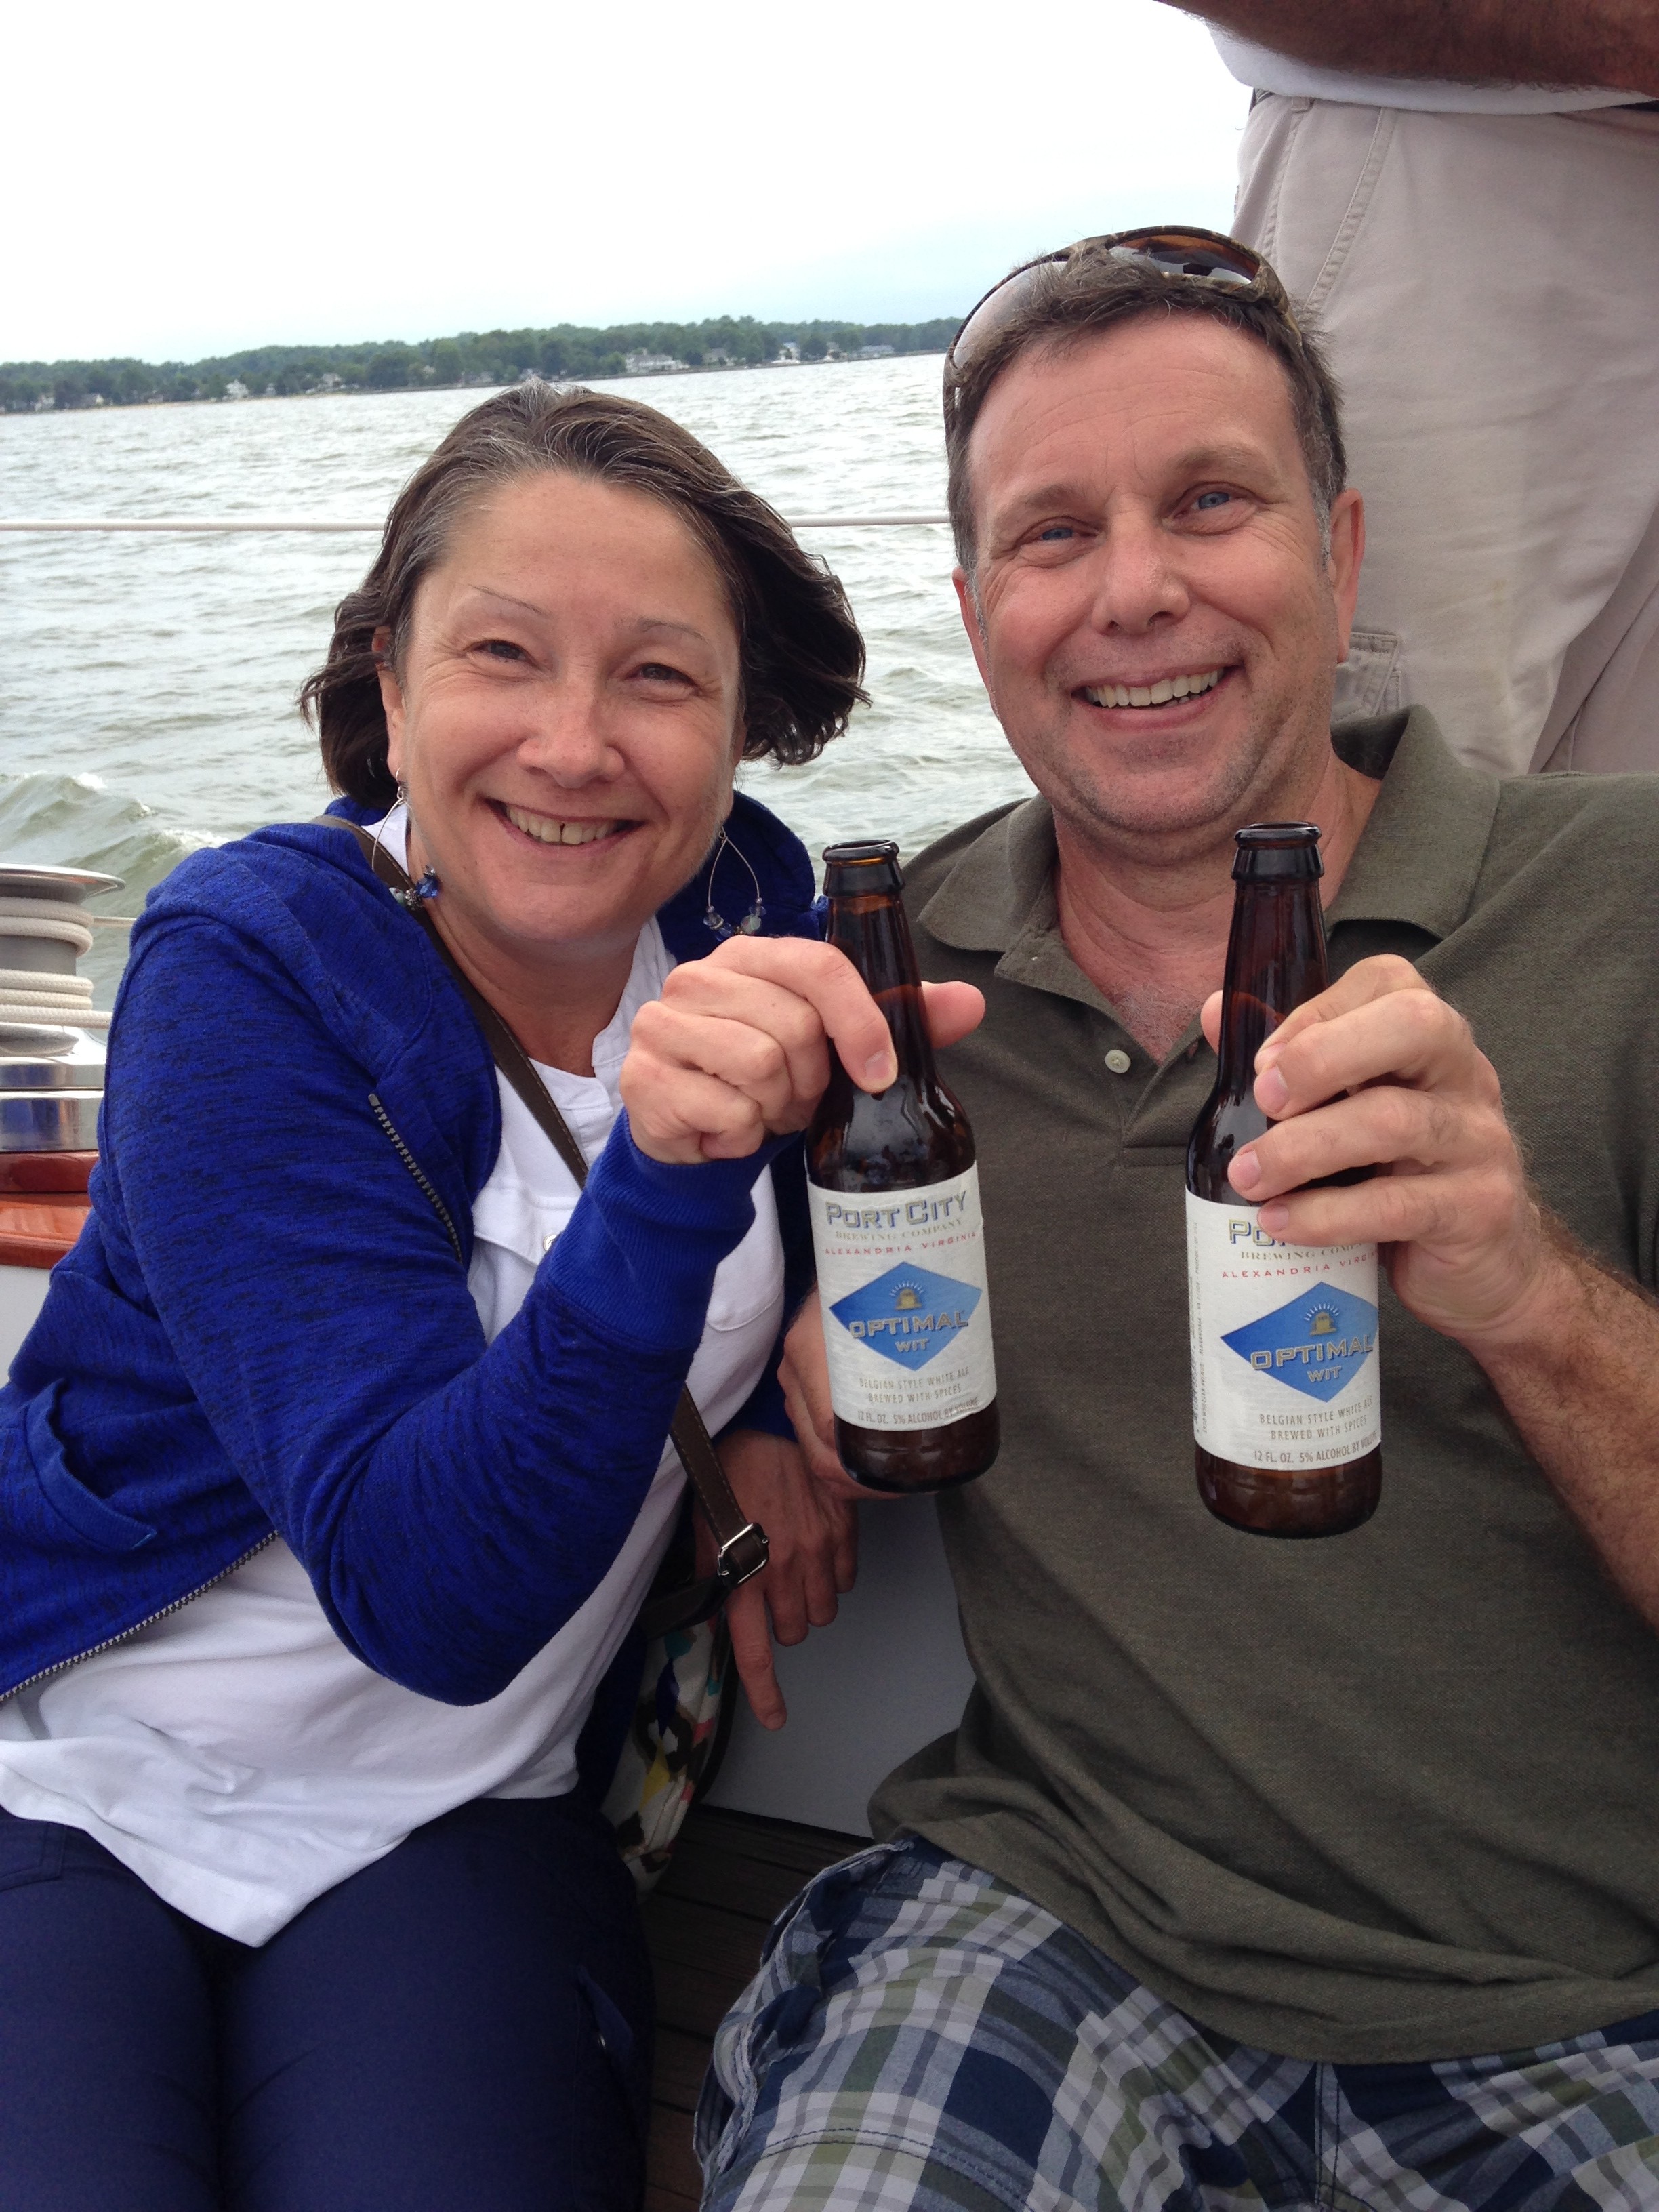 Two guests enjoying Port City beverages on a sail